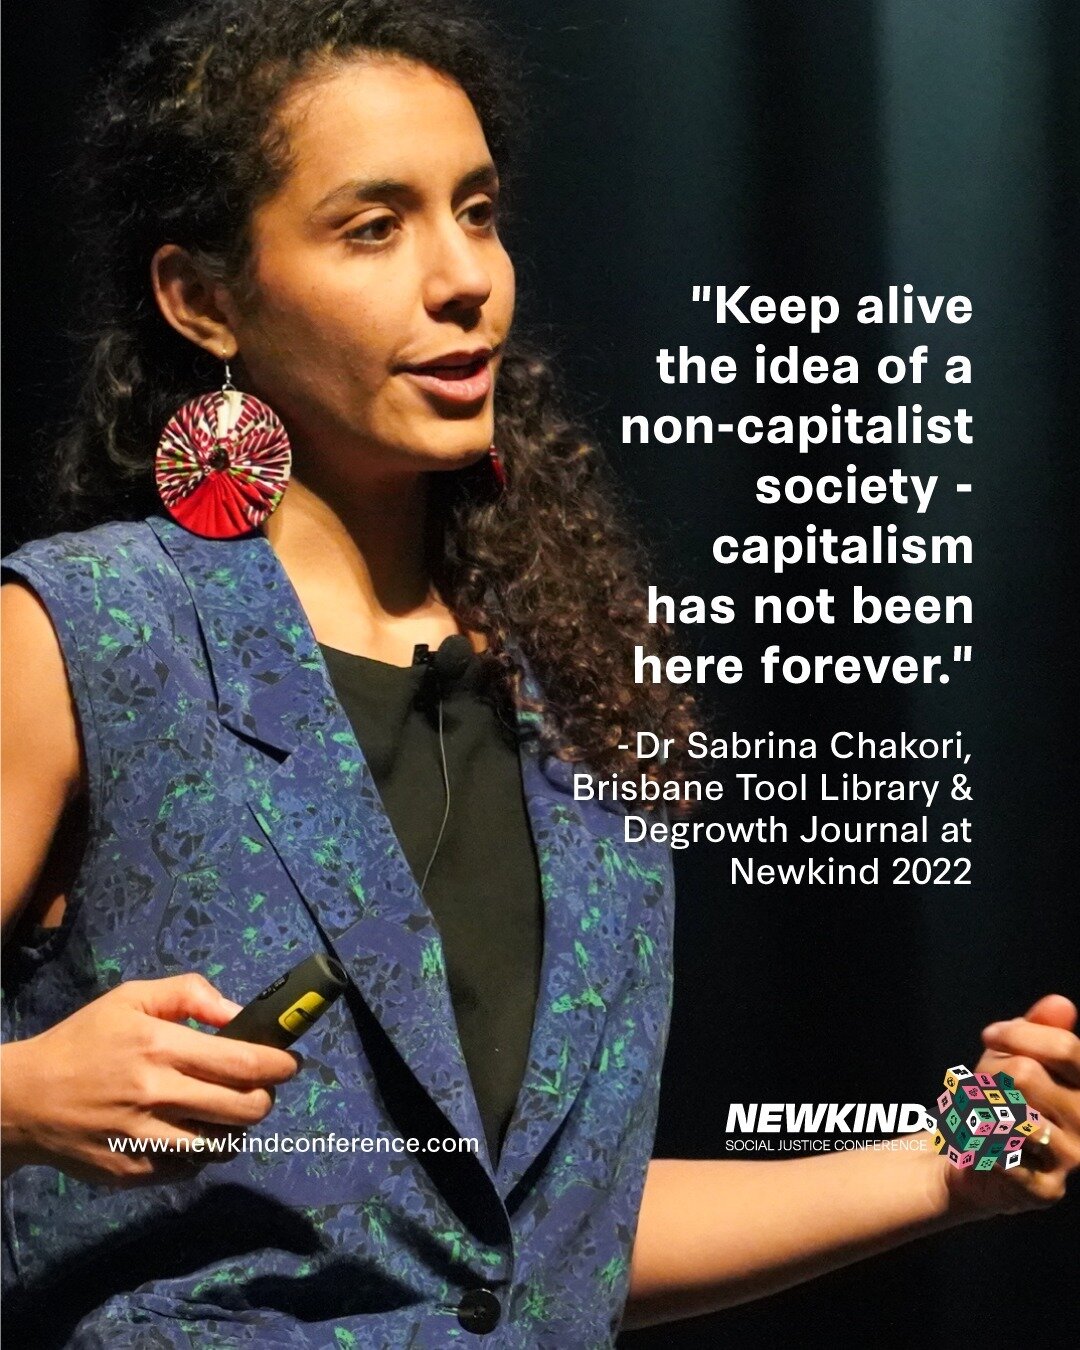 &quot;Keep alive the idea of a non-capitalist society - capitalism has not been here forever.&quot;

🎤 Dr Sabrina Chakori, Founder of @brisbanetoollibrary &amp; Degrowth Journal at Newkind 2022

#newkind #newkindconfernce #newkind2022 #degrowth #ant